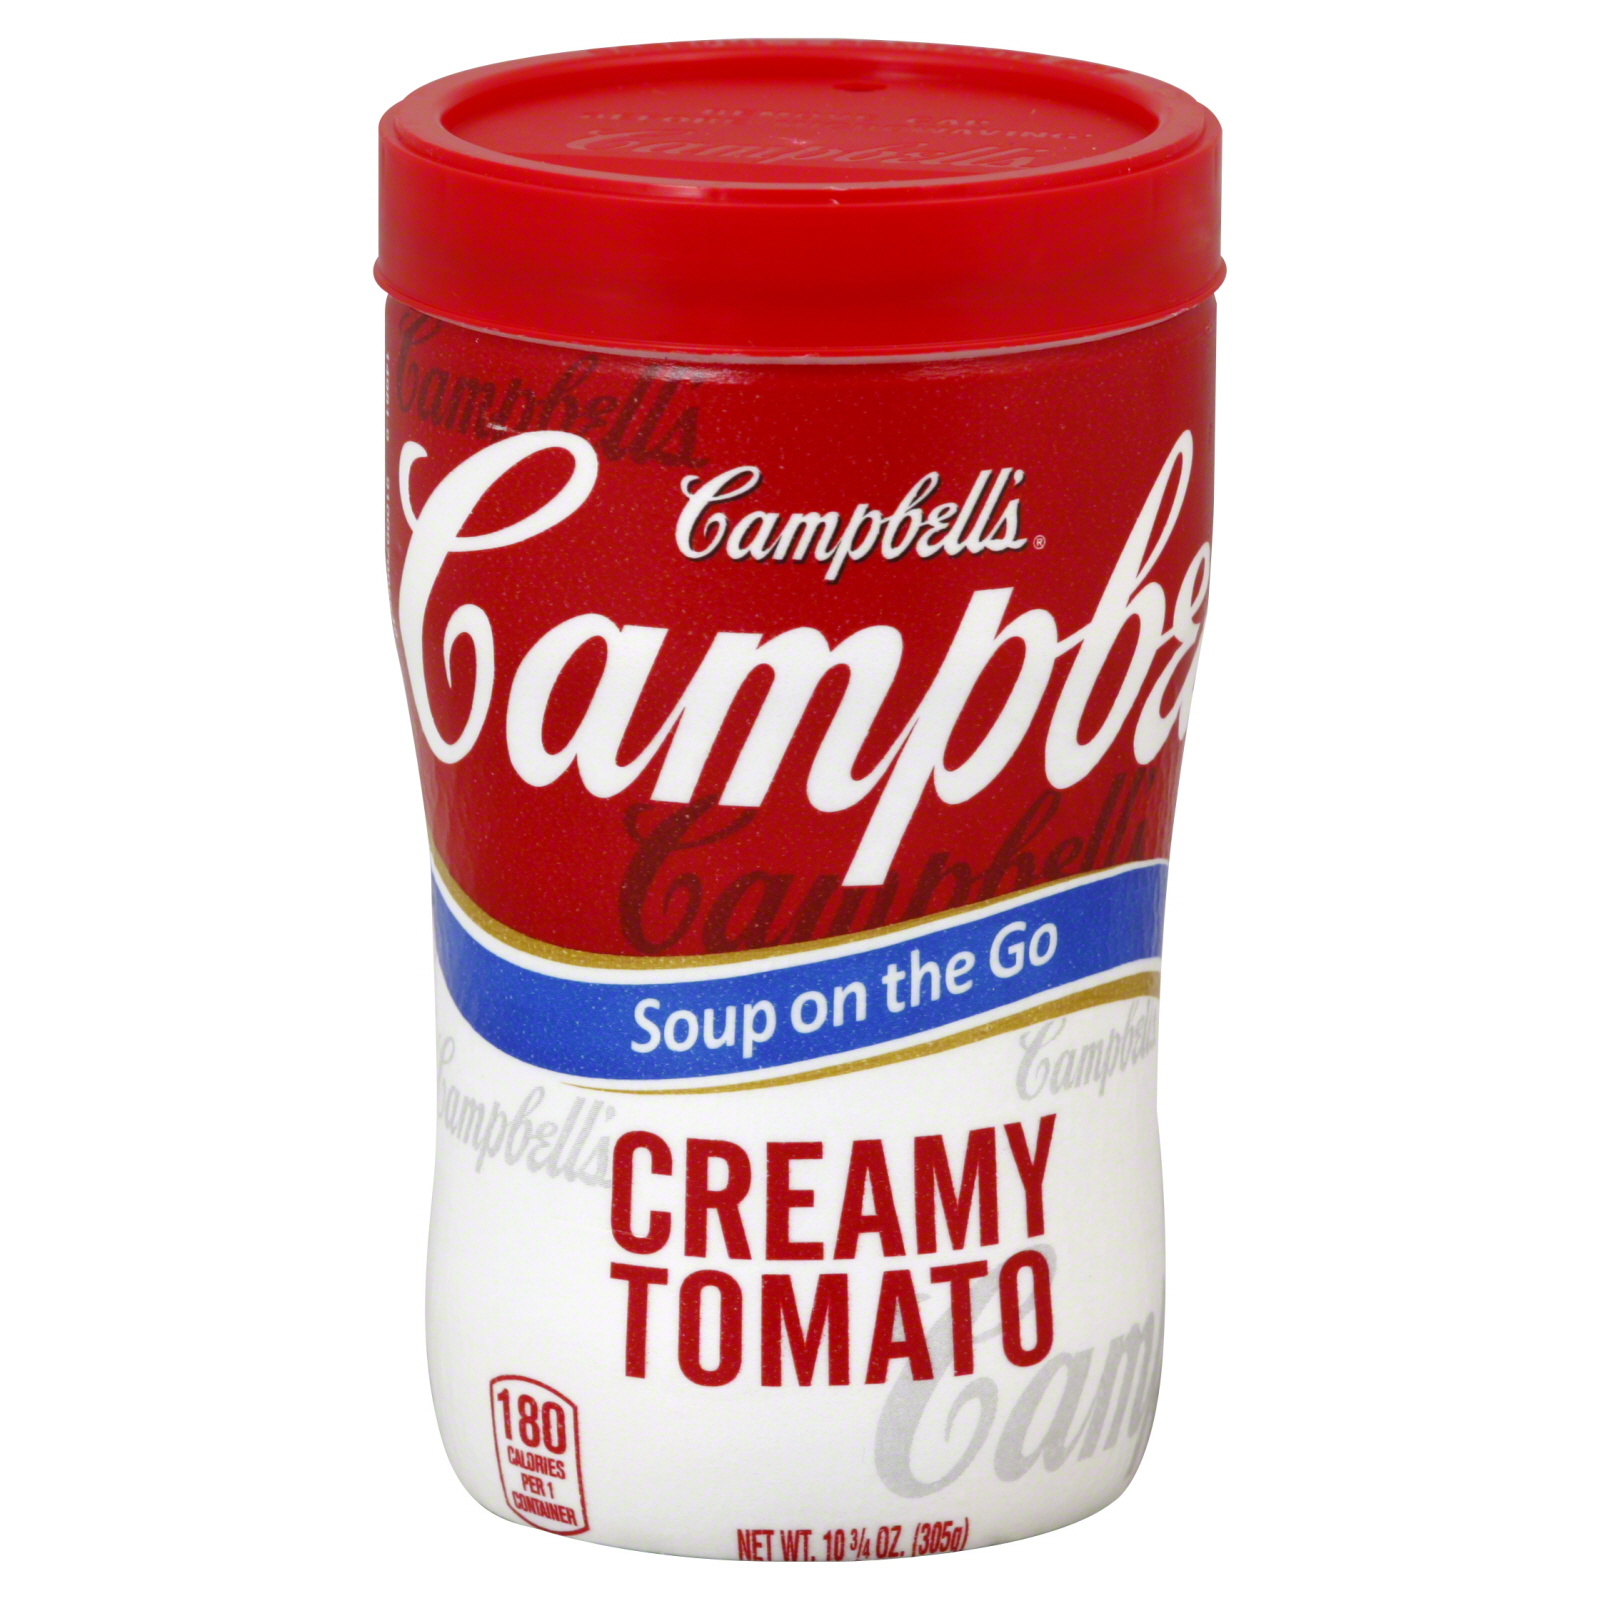 Campbell's Soup at Hand Soup, Creamy Tomato, 10.75 oz (305 g)